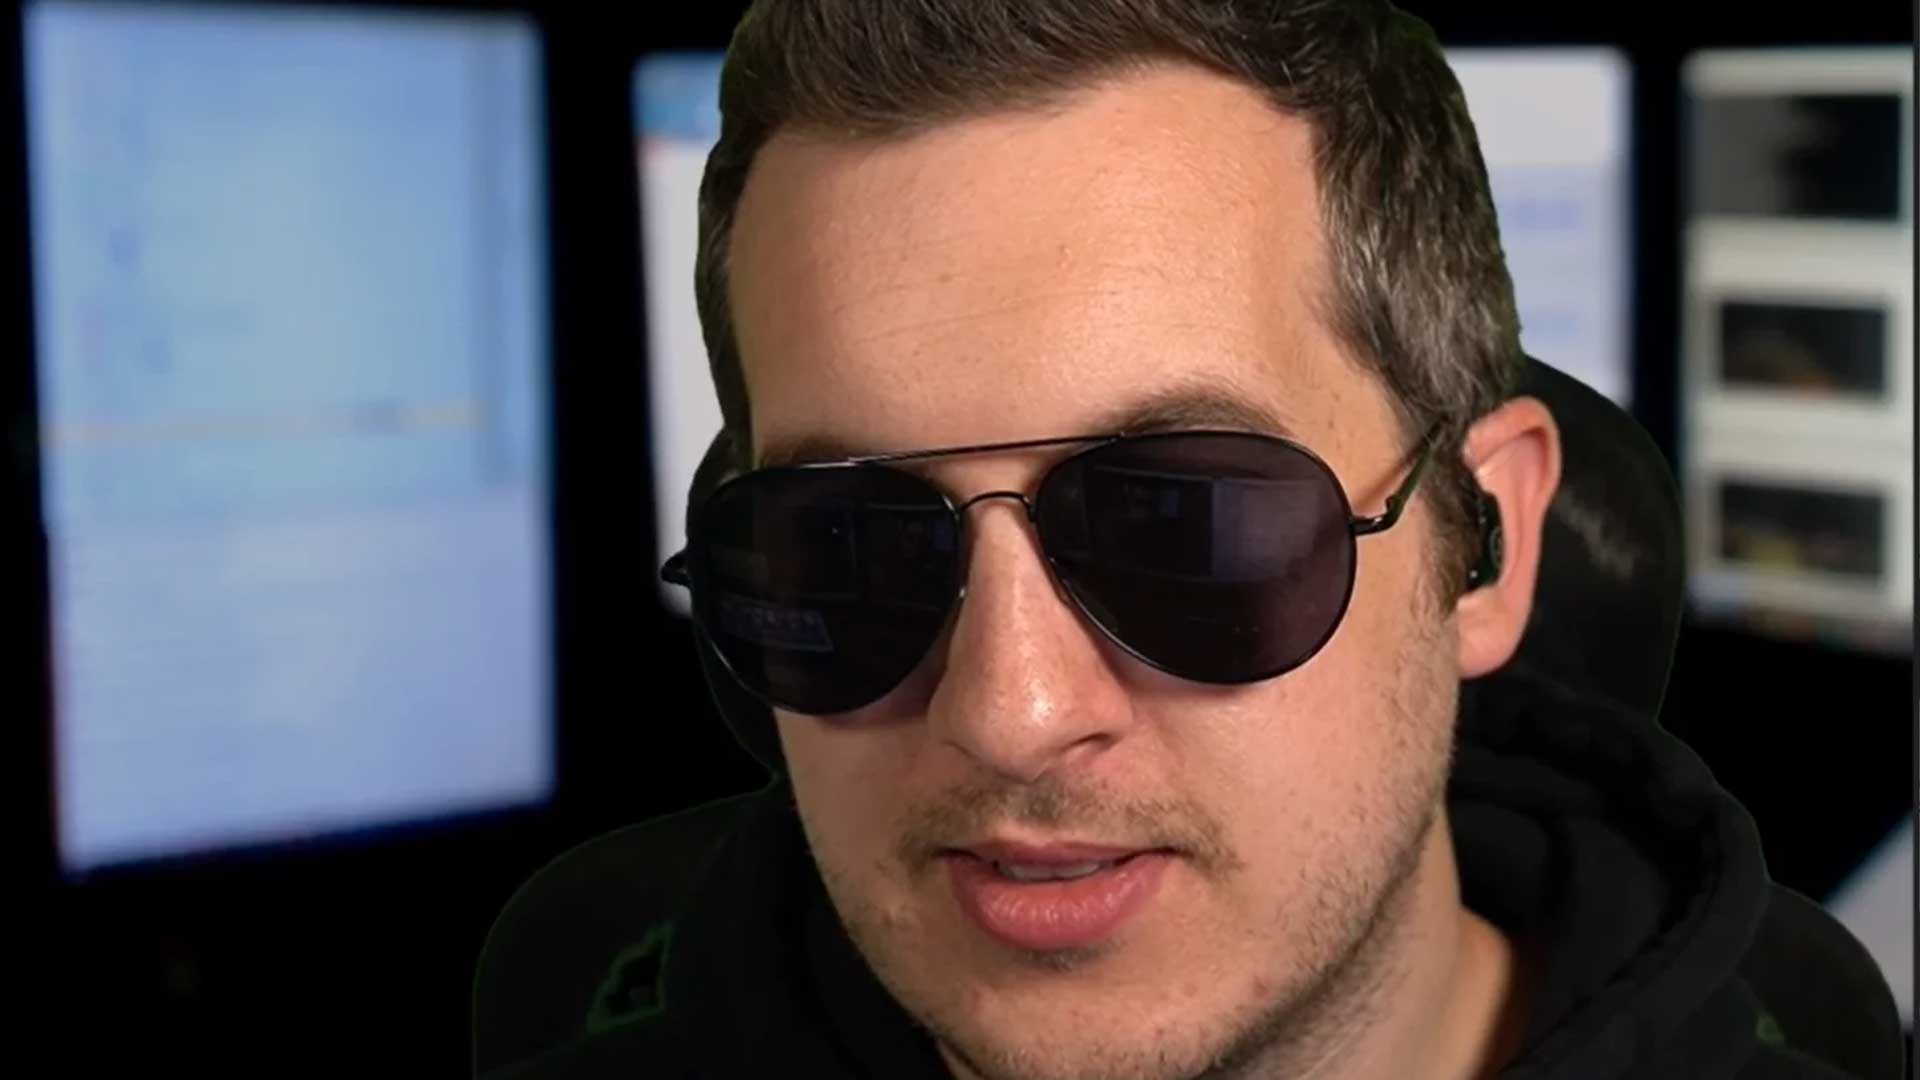 Kitboga, a popular "scam baiter" who hides behind characters to waste the time of scammers, has a combined Twitch and YouTube following of more than million subscribers. His aviator sunglasses — a signature look — recall a comically disguised CIA agent.